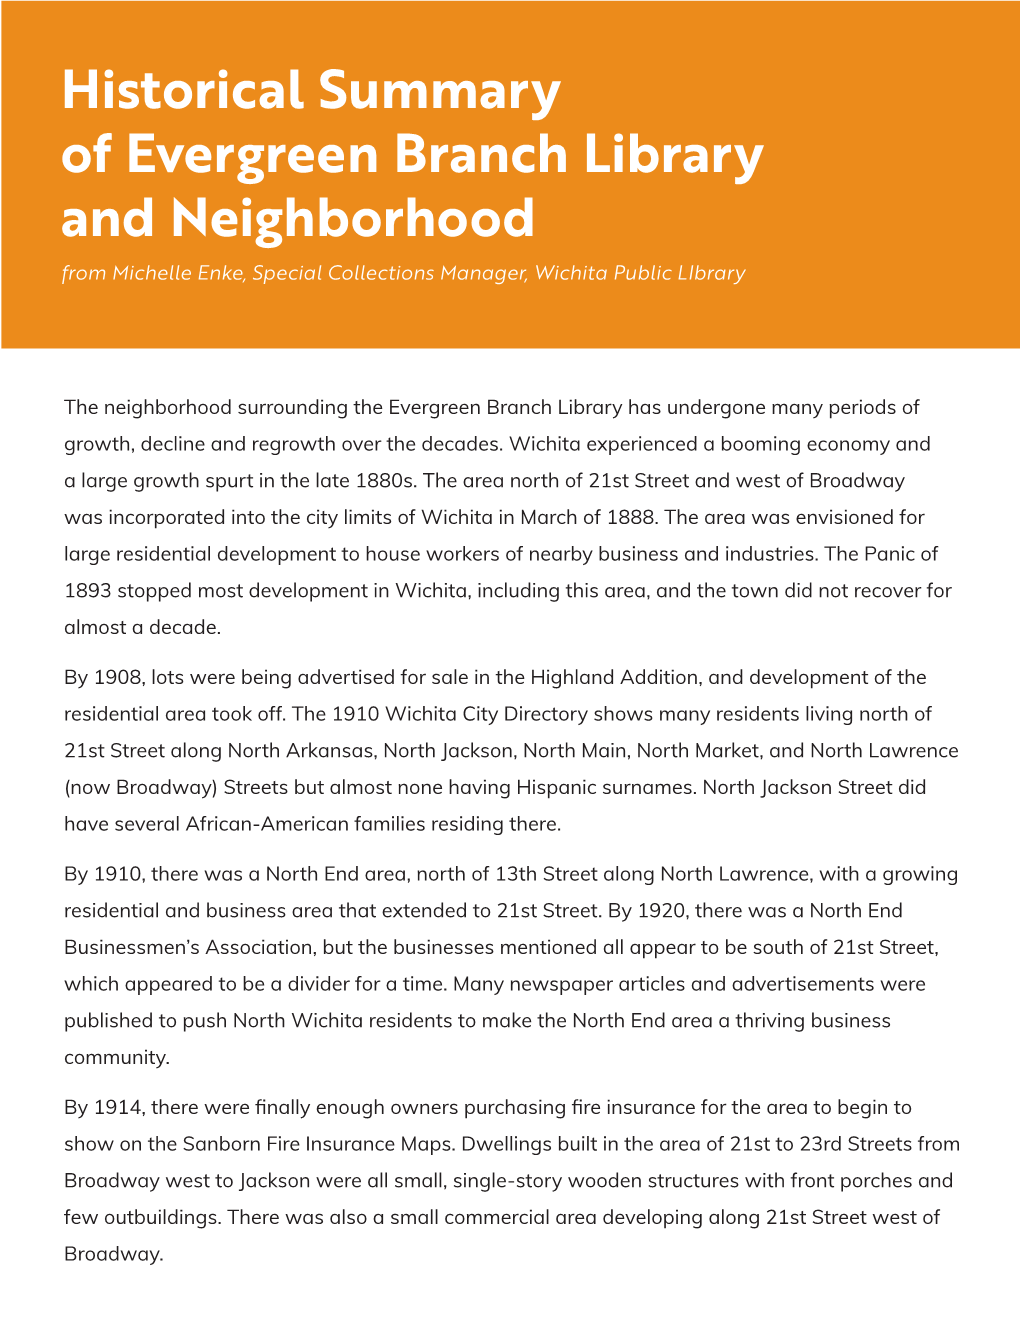 Historical Summary of Evergreen Branch Library and Neighborhood from Michelle Enke, Special Collections Manager, Wichita Public Library